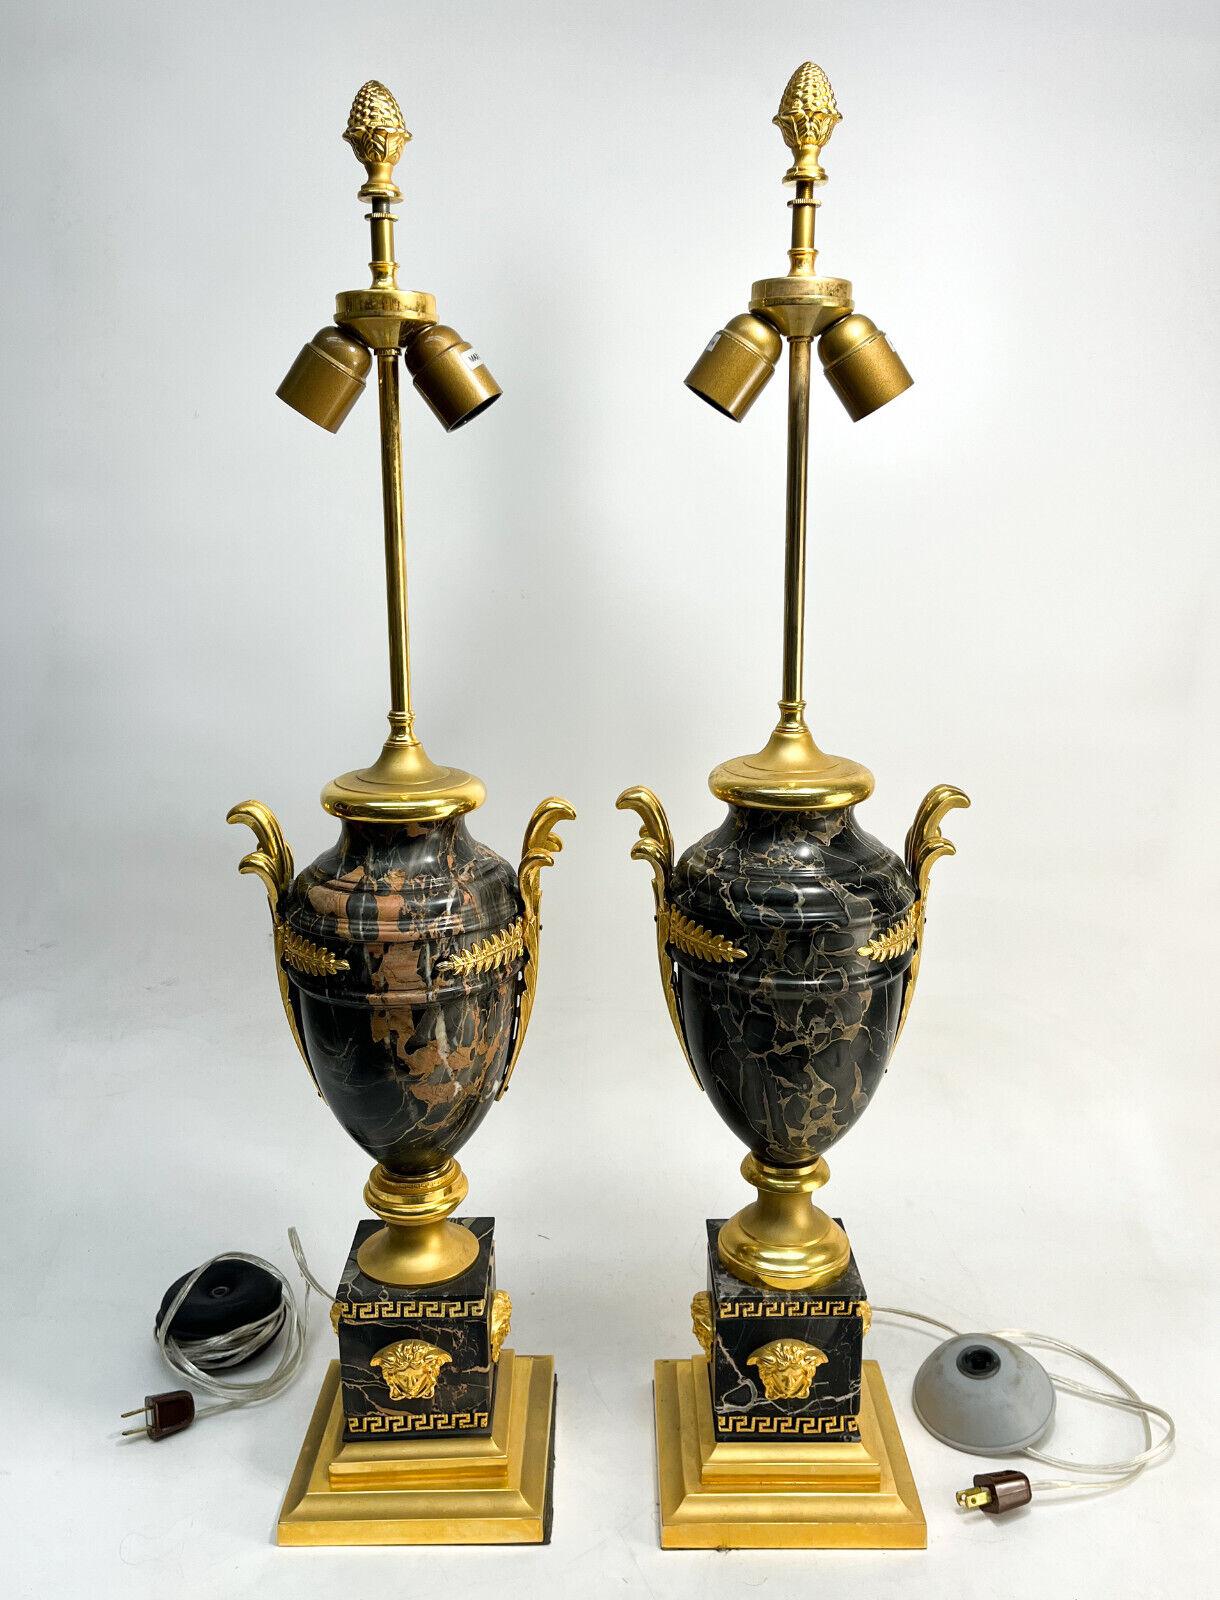 Pair of Versace Gilt bronze mounted marble lamps

A substantial pair of gilt bronze mounted veined pesco marble lamps in the Medusa pattern by Versace.Gilt bronze laurel leave mounts to the body with medusa heads to each wall of the base. Includes